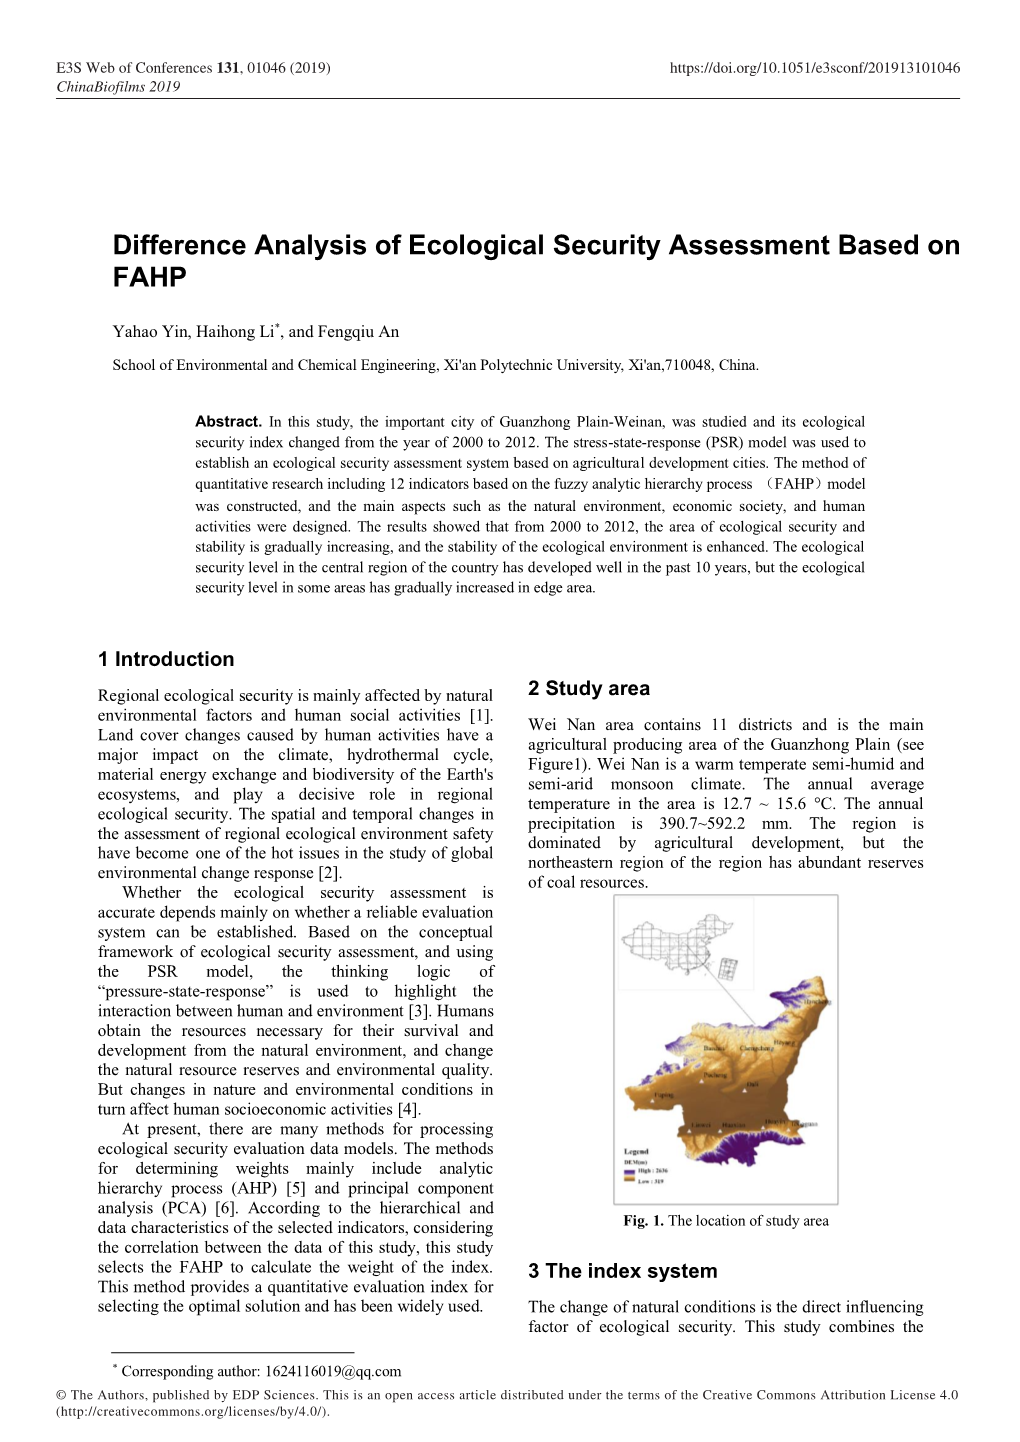 Difference Analysis of Ecological Security Assessment Based on FAHP